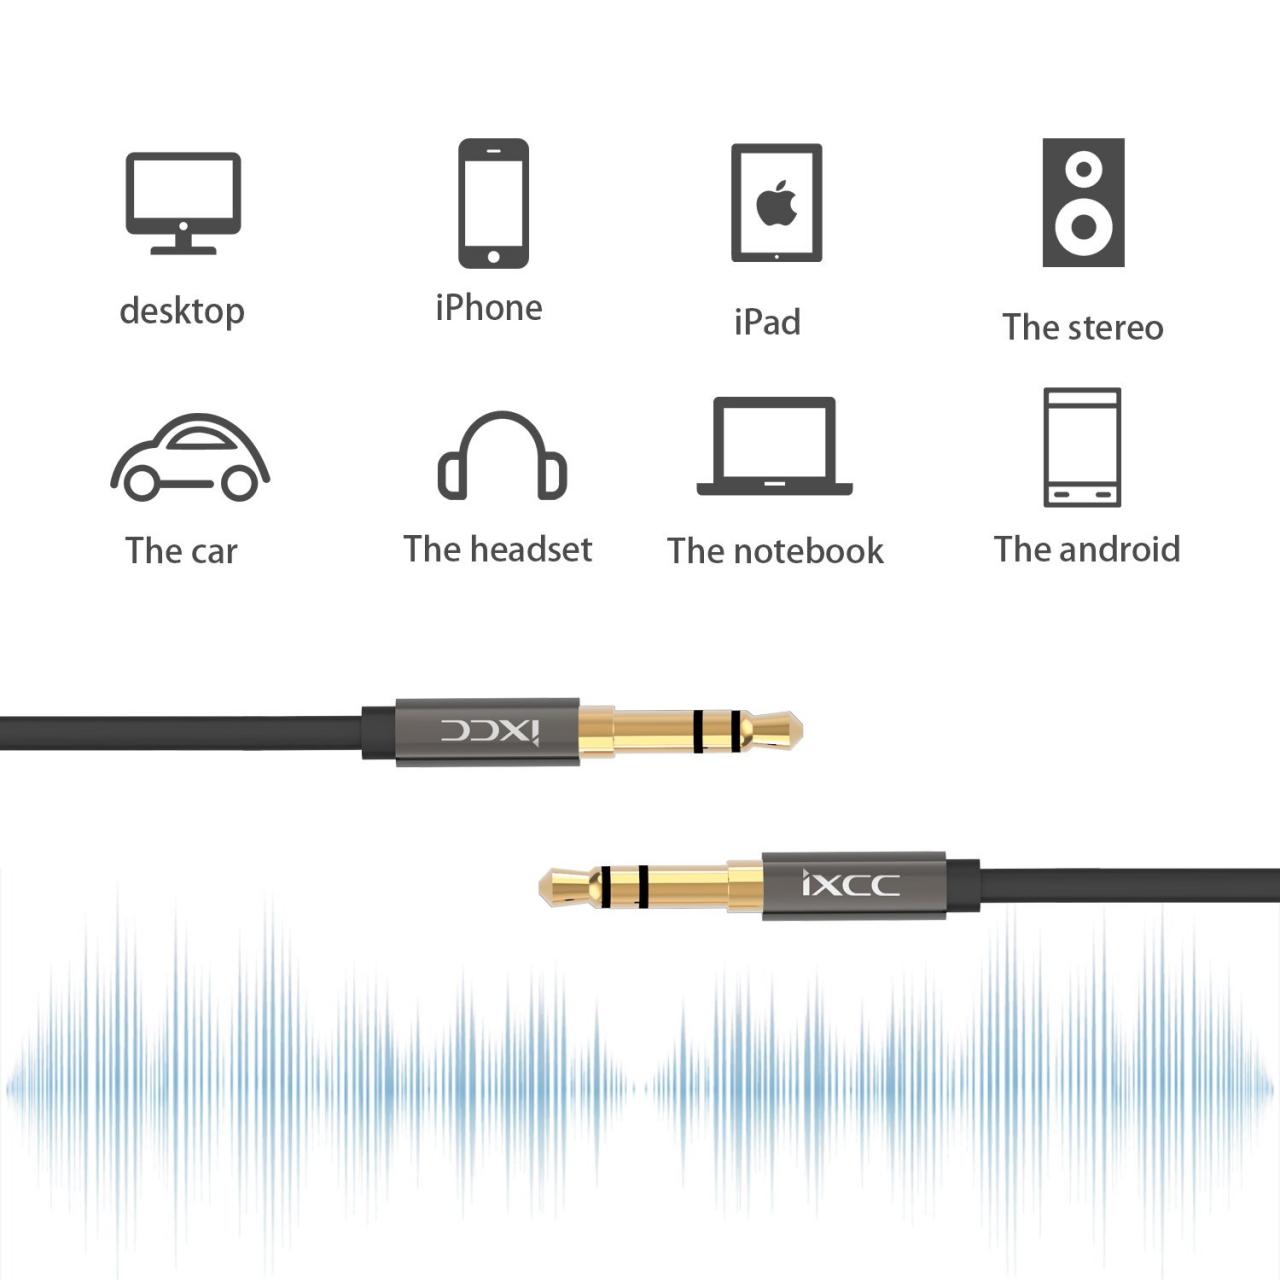 Samsung Windows and MP3 Player Ultra-Slim Android iXCC 4 Feet Male to Male  3.5mm Universal Aux Audio Stereo Cable Cord for Car and All 3.5mm-Enabled  Devices Apple Electronics Stereo Jack Cables kanakadurgamma.org